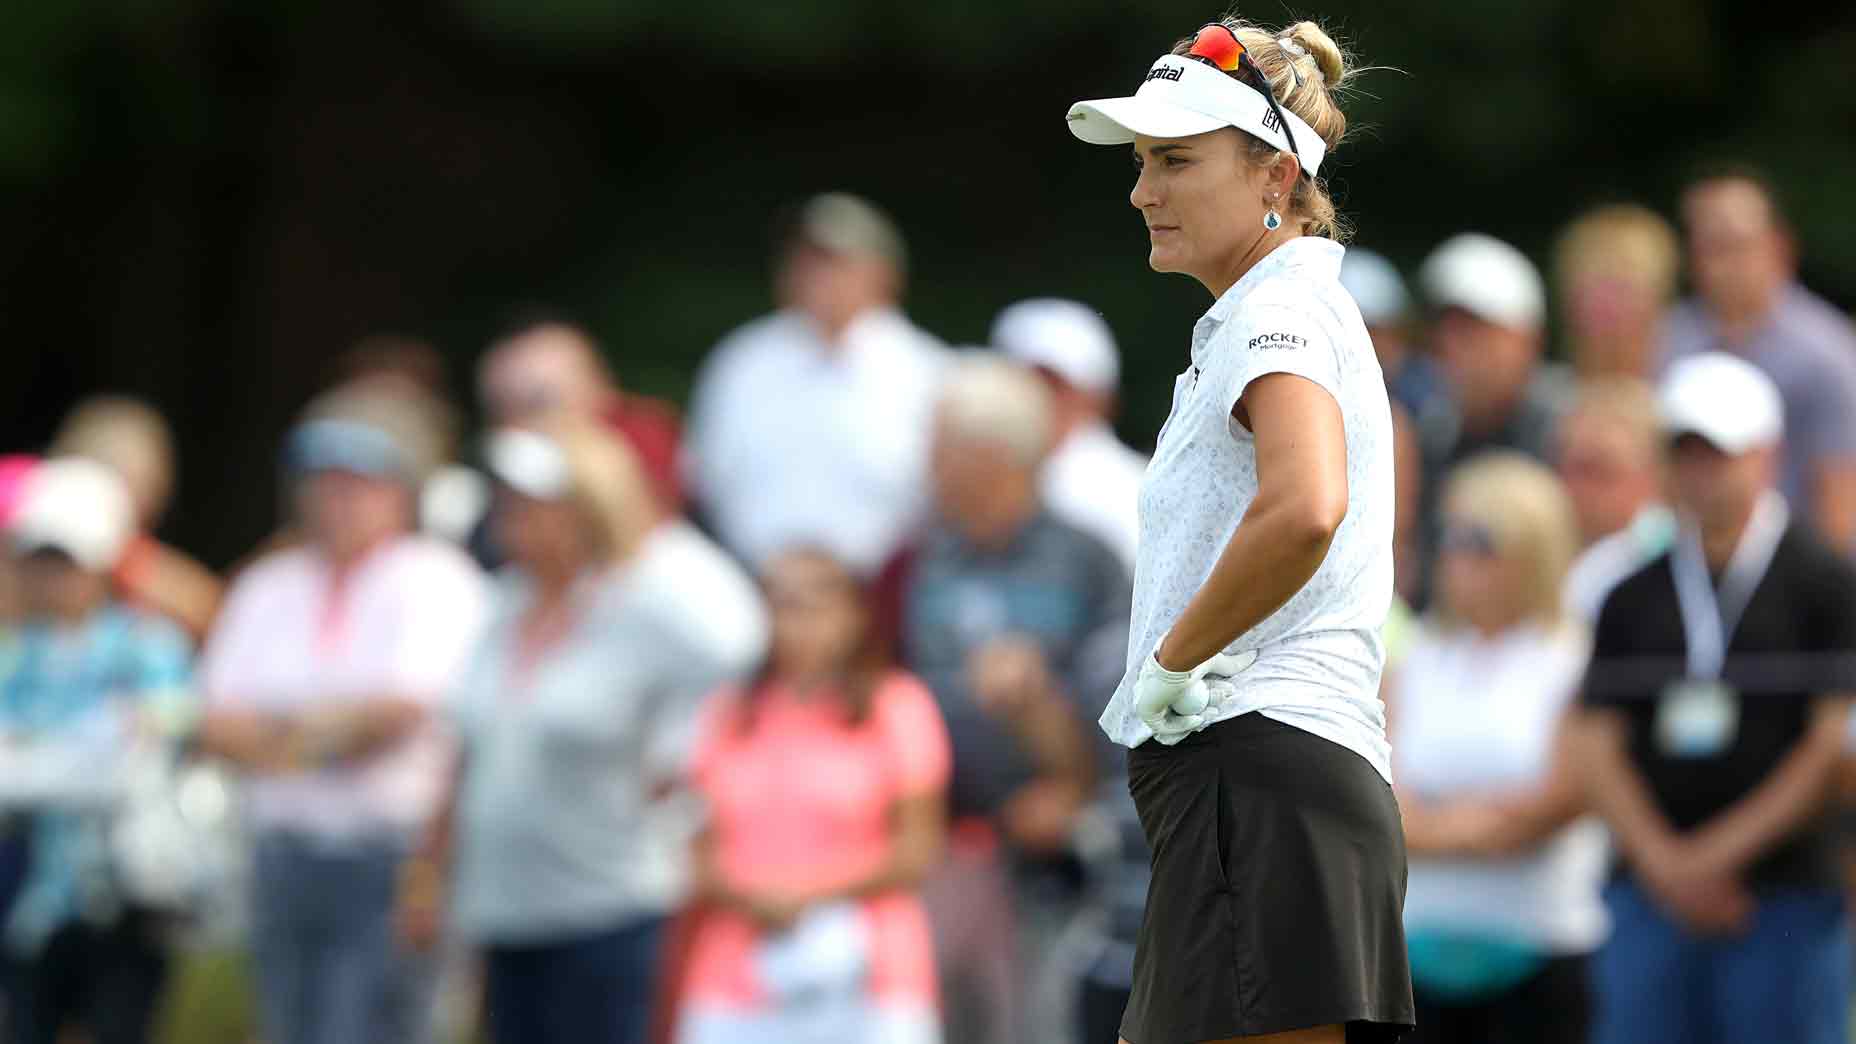 Lexi Thompson's strategy for staying patient on the course can help you